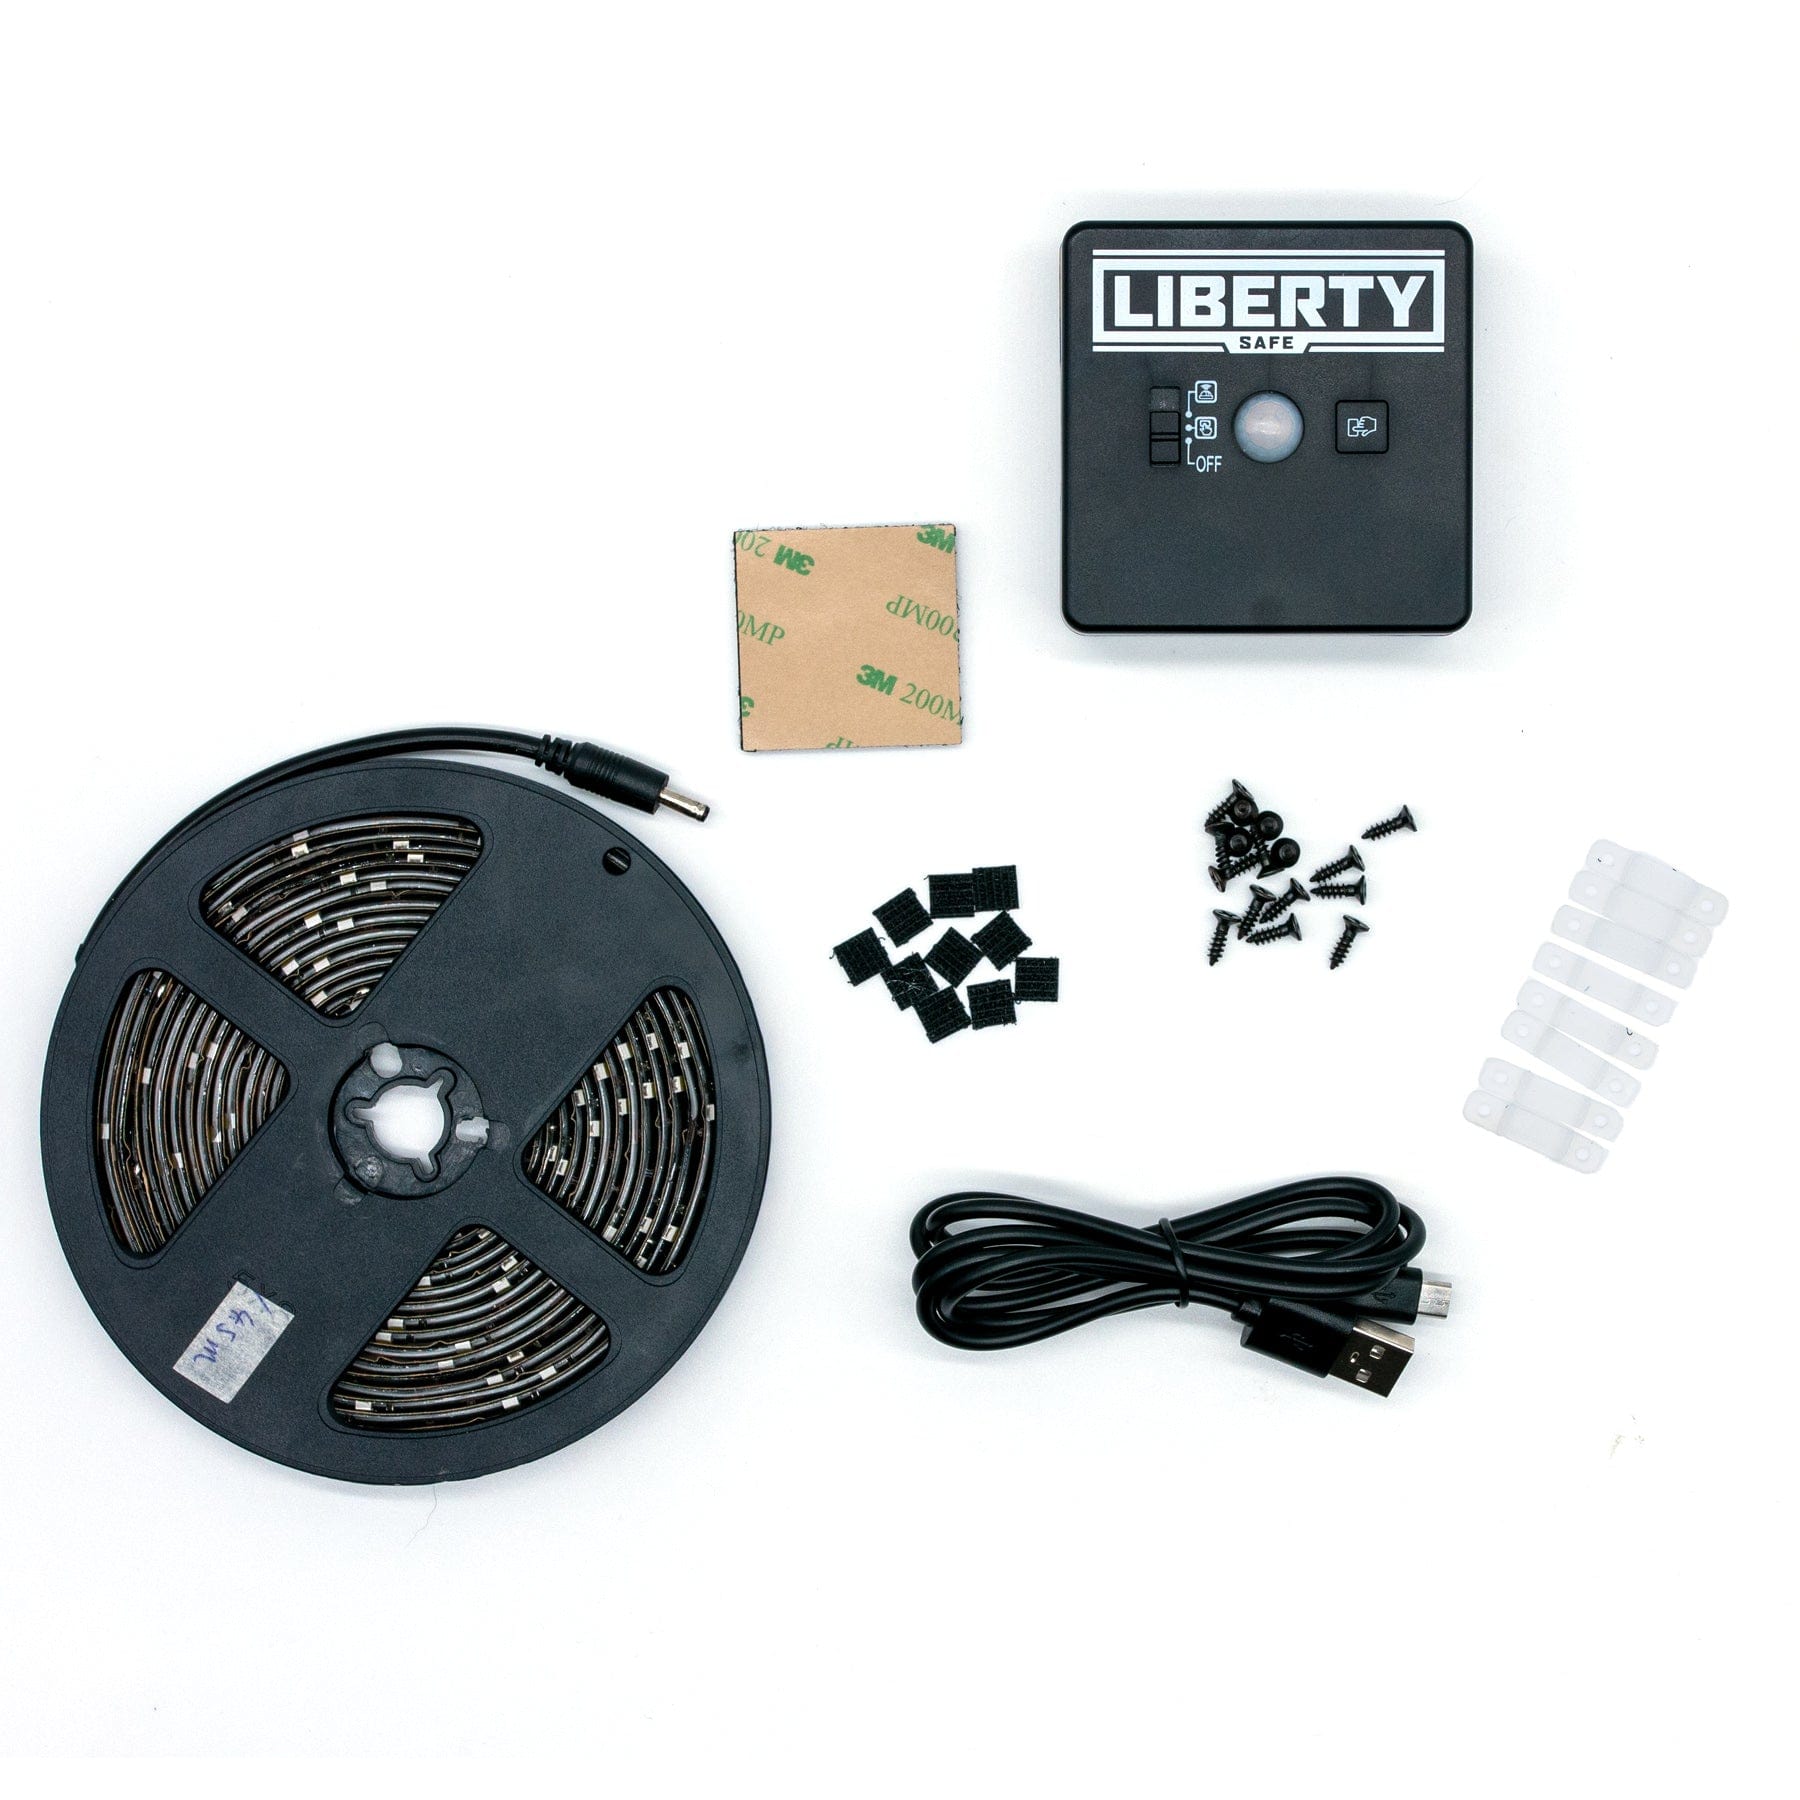 Clearview Electrical LED Wand Light Kit - Liberty Safe Accesso    The best lights are in Liberty Safes. The  Clearview safe light kit is the pinnacle of Liberty's interior lighting. It